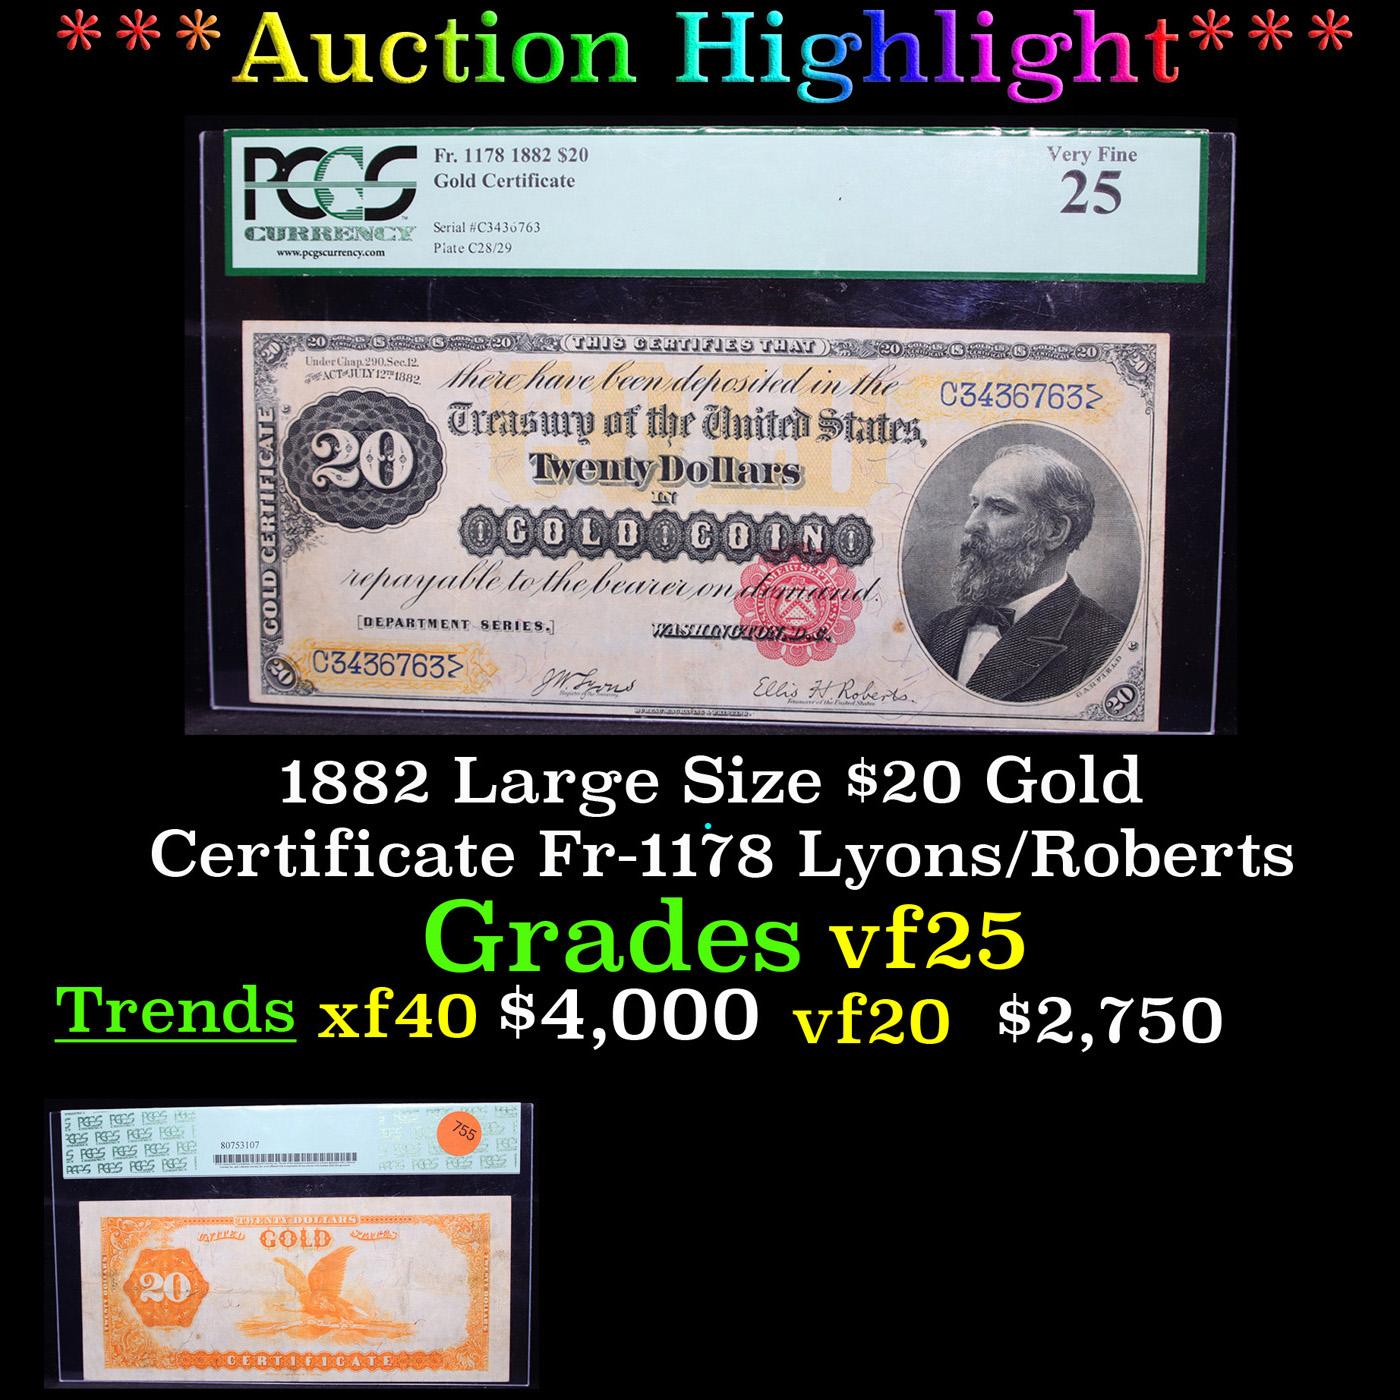 ***Auction Highlight*** PCGS 1882 Large Size $20 Gold Certificate Fr-1178 Lyons/Roberts Graded vf25